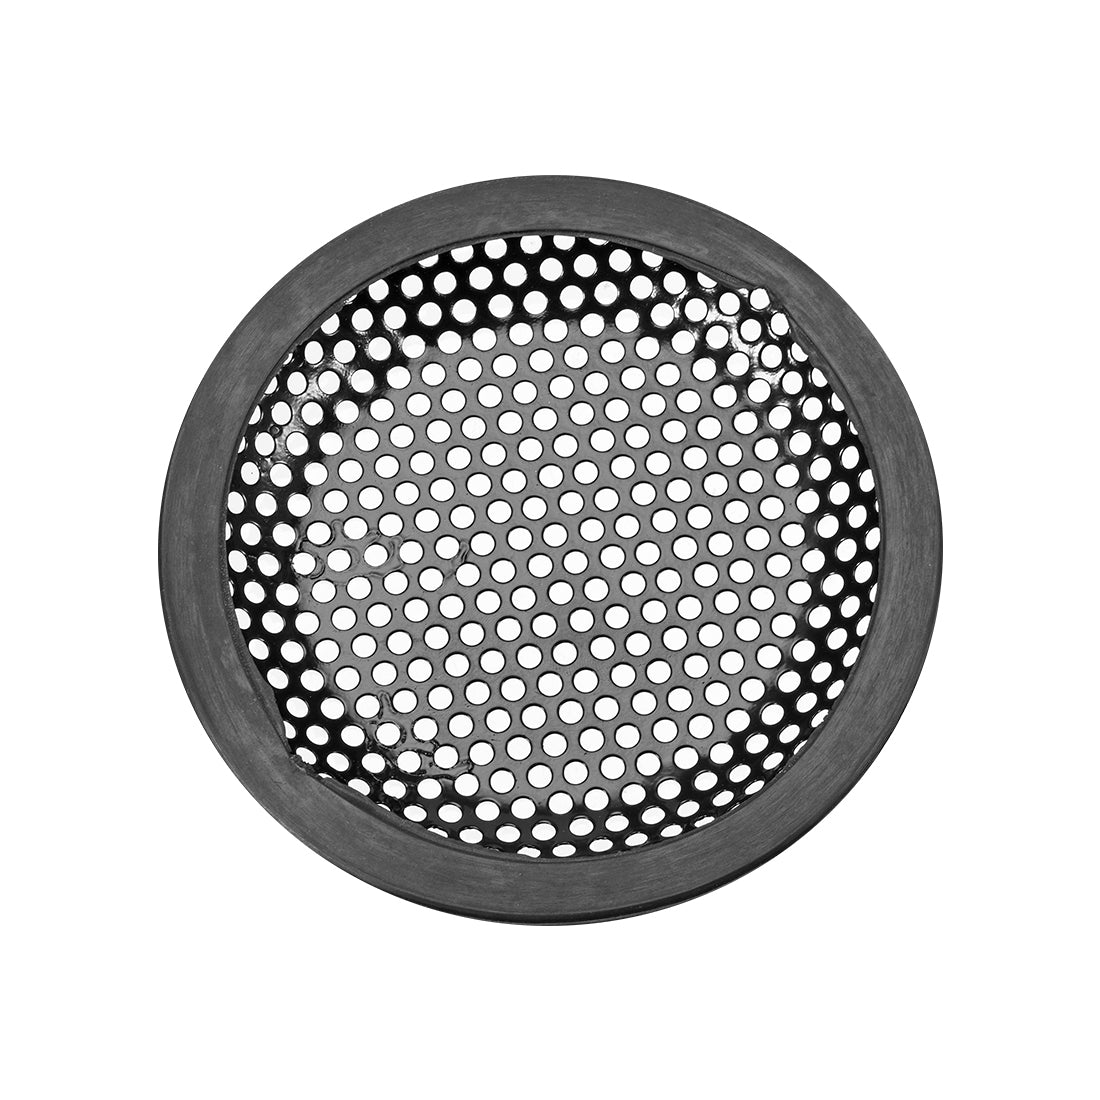 uxcell Uxcell 5" Speaker Waffle Grill Metal Mesh Audio Subwoofer Guard Protector Cover with Clips,Screws